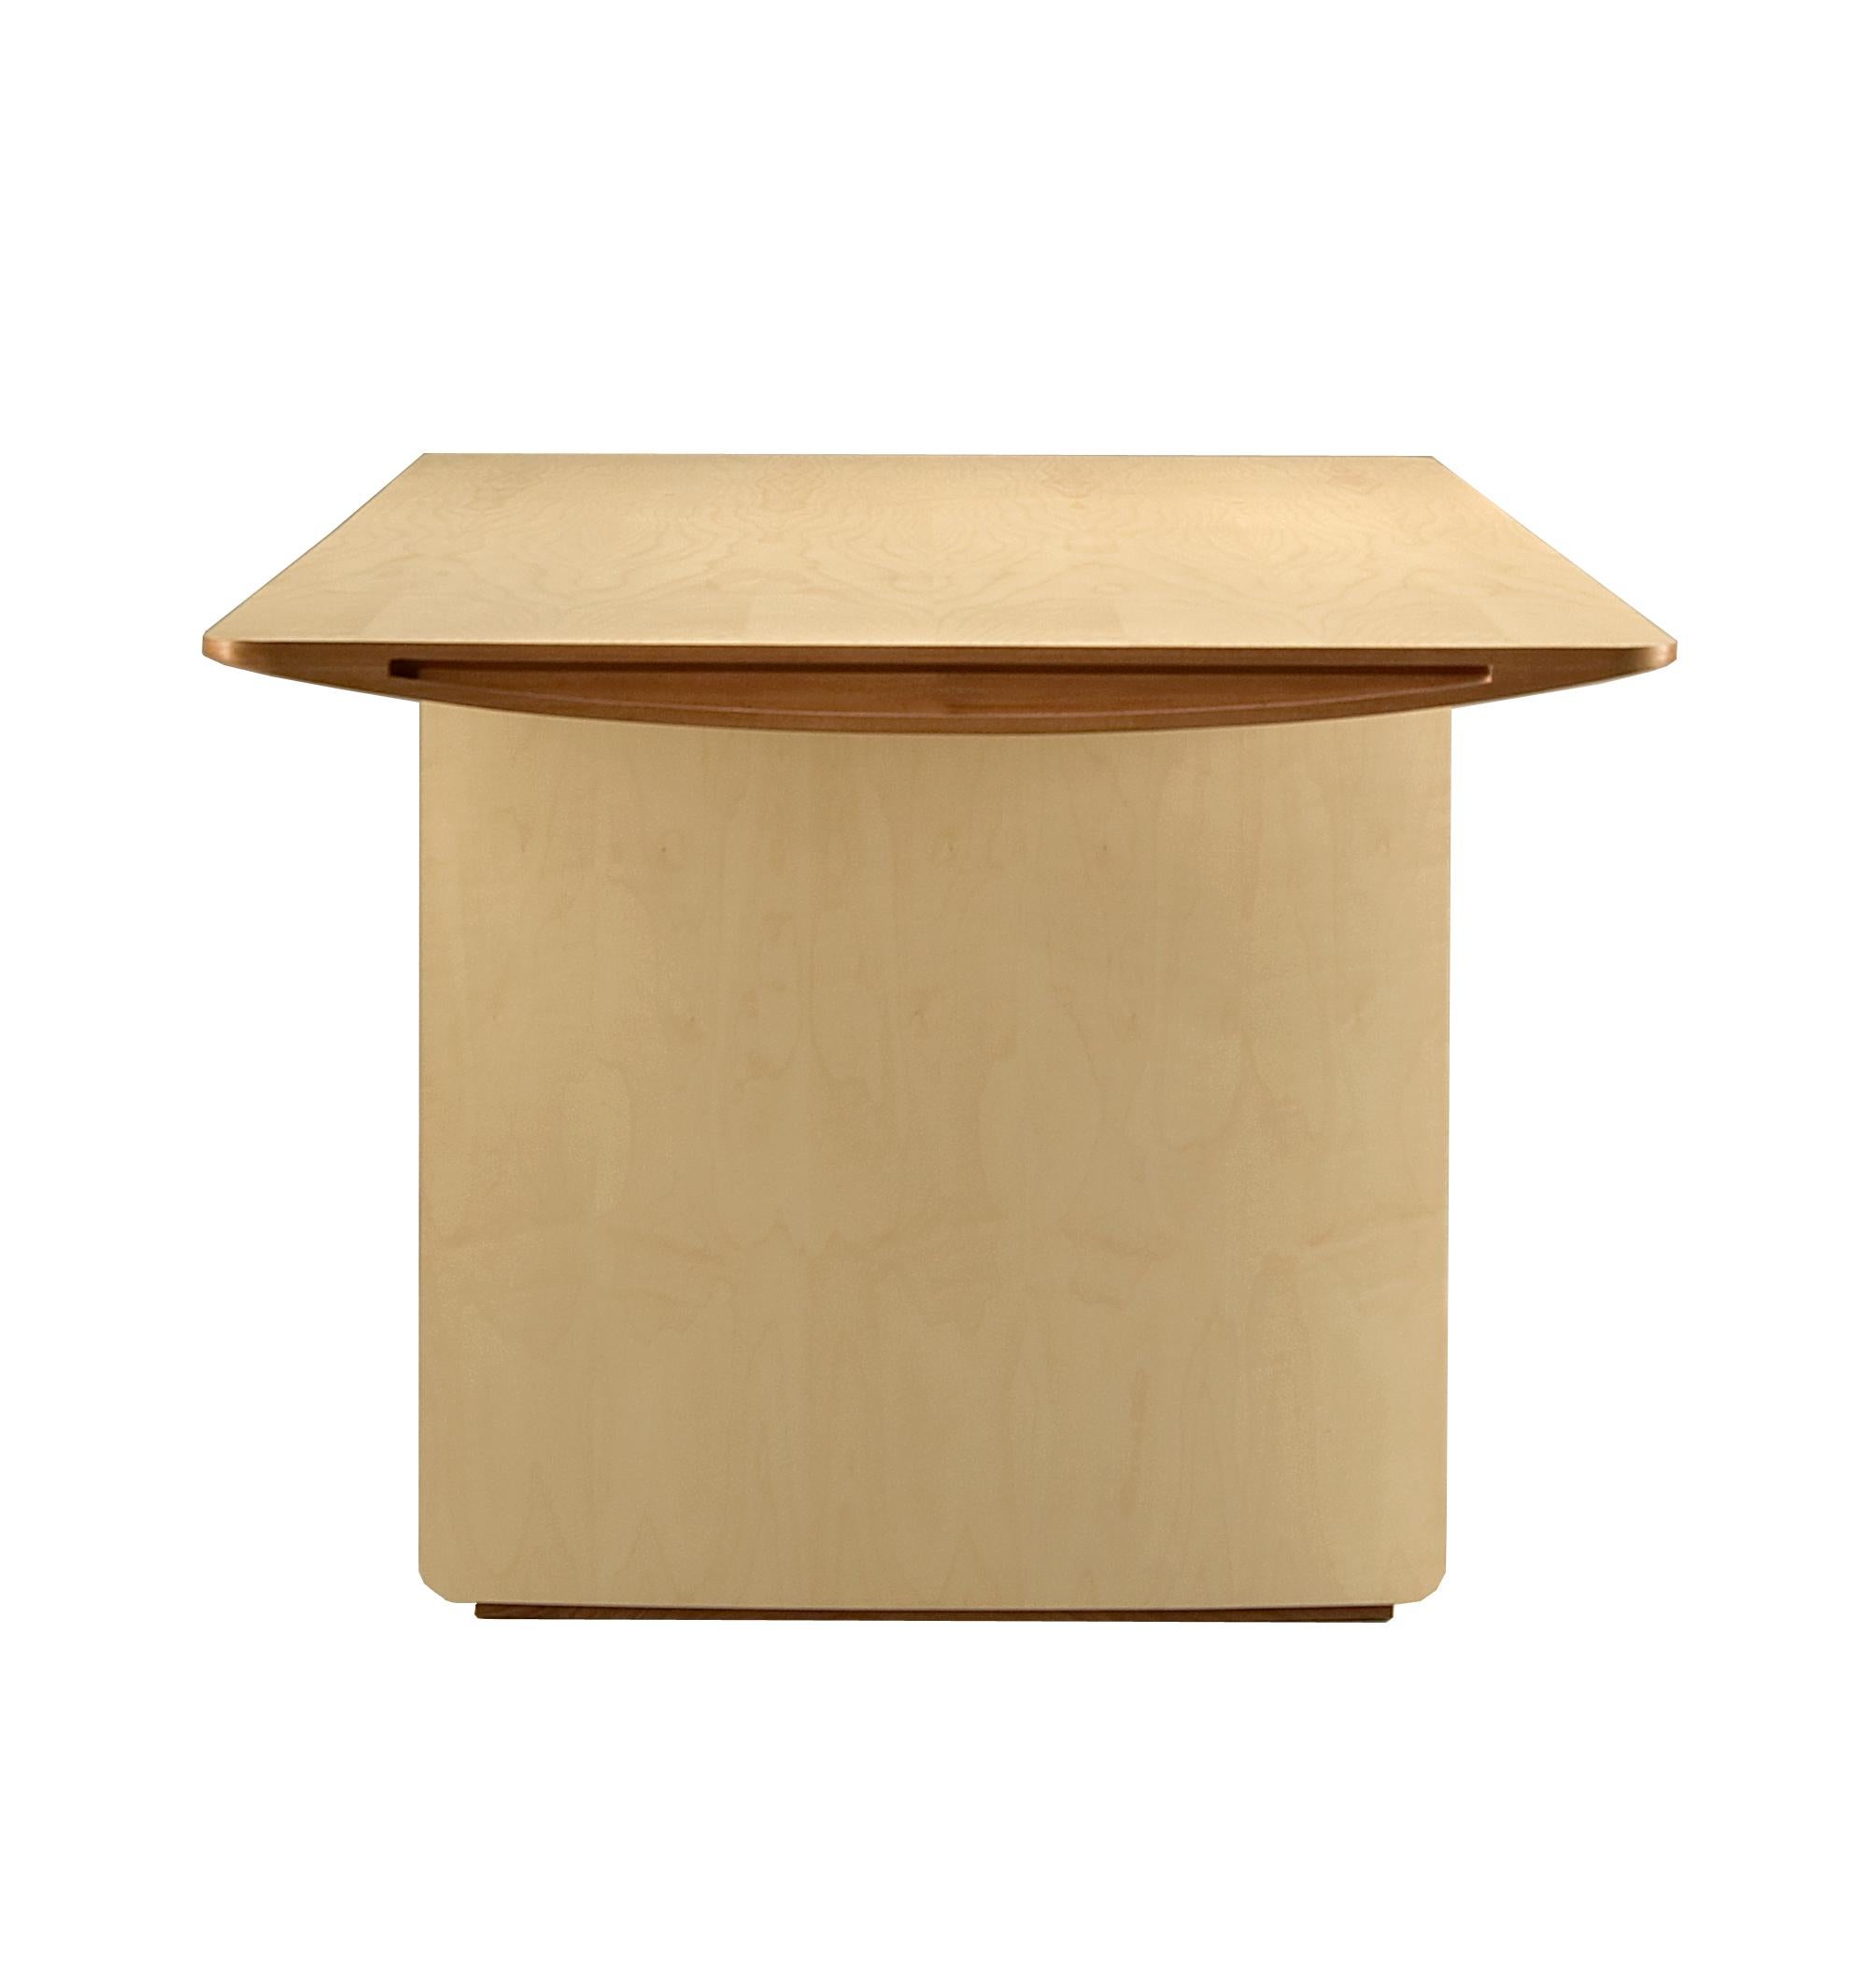 The Aero, designed by Franco Poli for Morelato, is a table consisting of two plywood panels, one of which is curved, joined together. This technique is used both for the top as well as for the feet of the table. 
Inside, the structure is made of